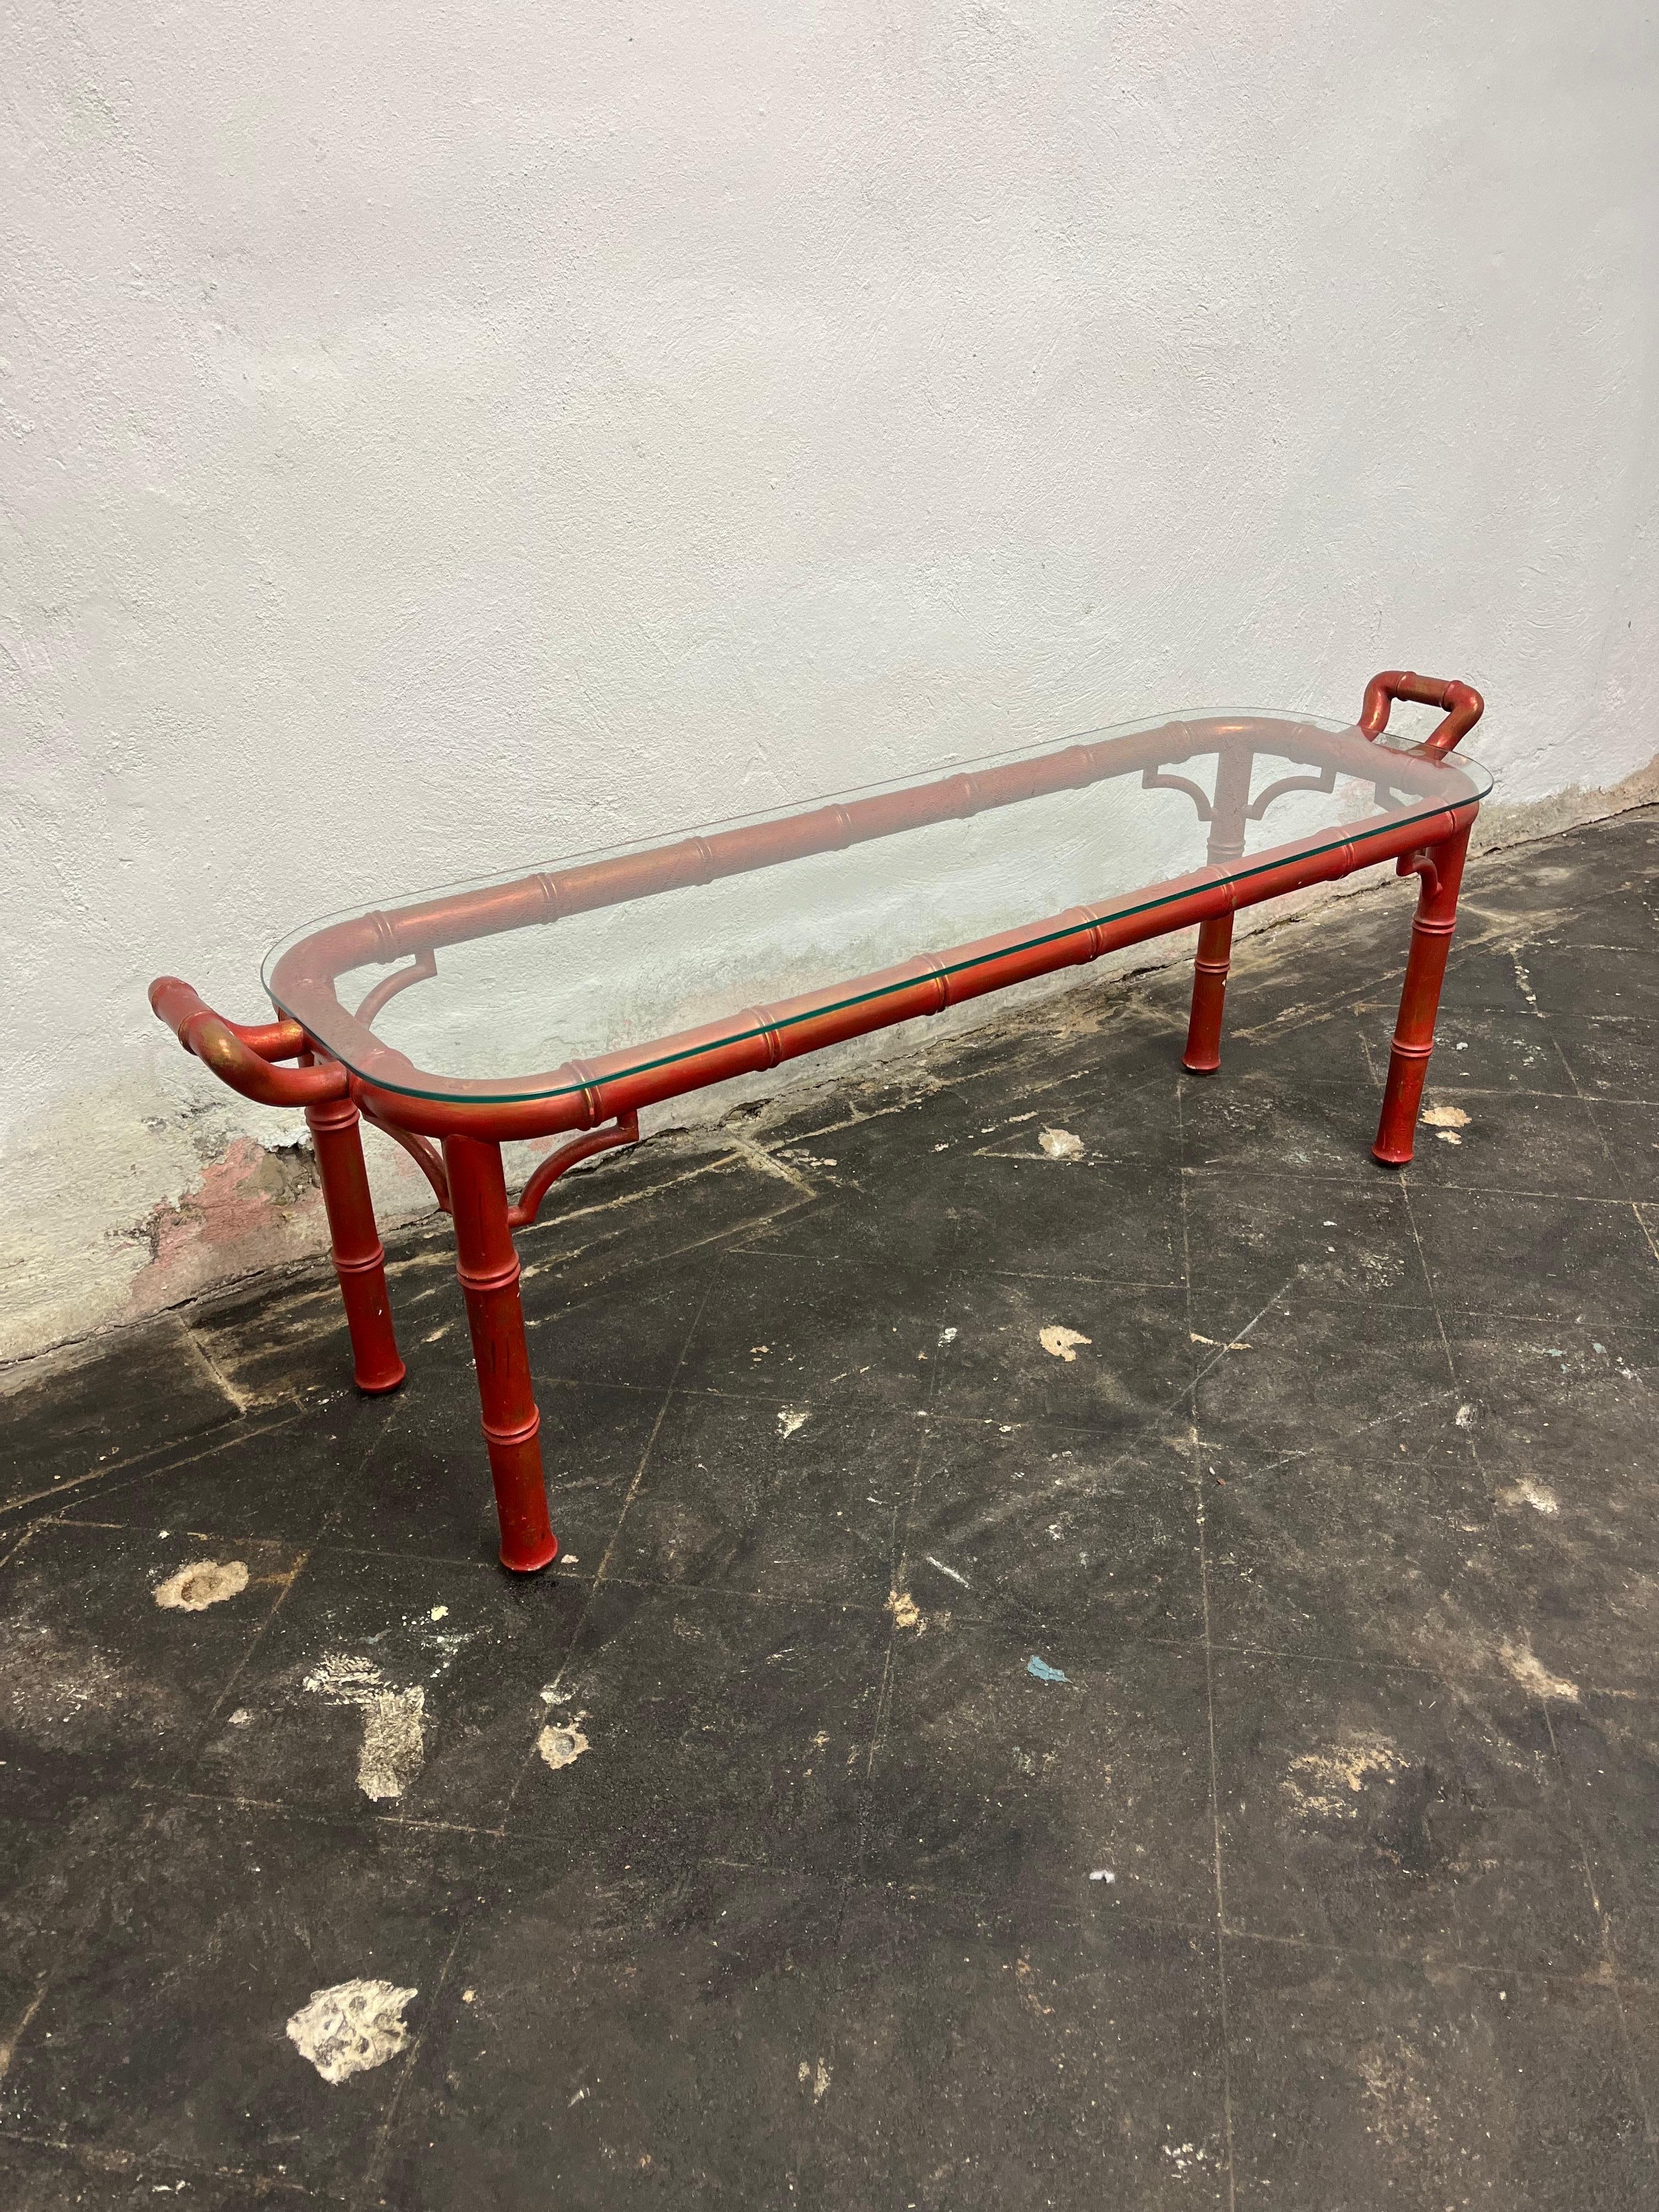 Mid-Century Modern Palm Regency style glass and wood handled cocktail table featuring a painted finish in crimson over gold. Bamboo style frame with rounded edge glass top. Could also be topped converted into a bench. In the style of Dorothy Draper